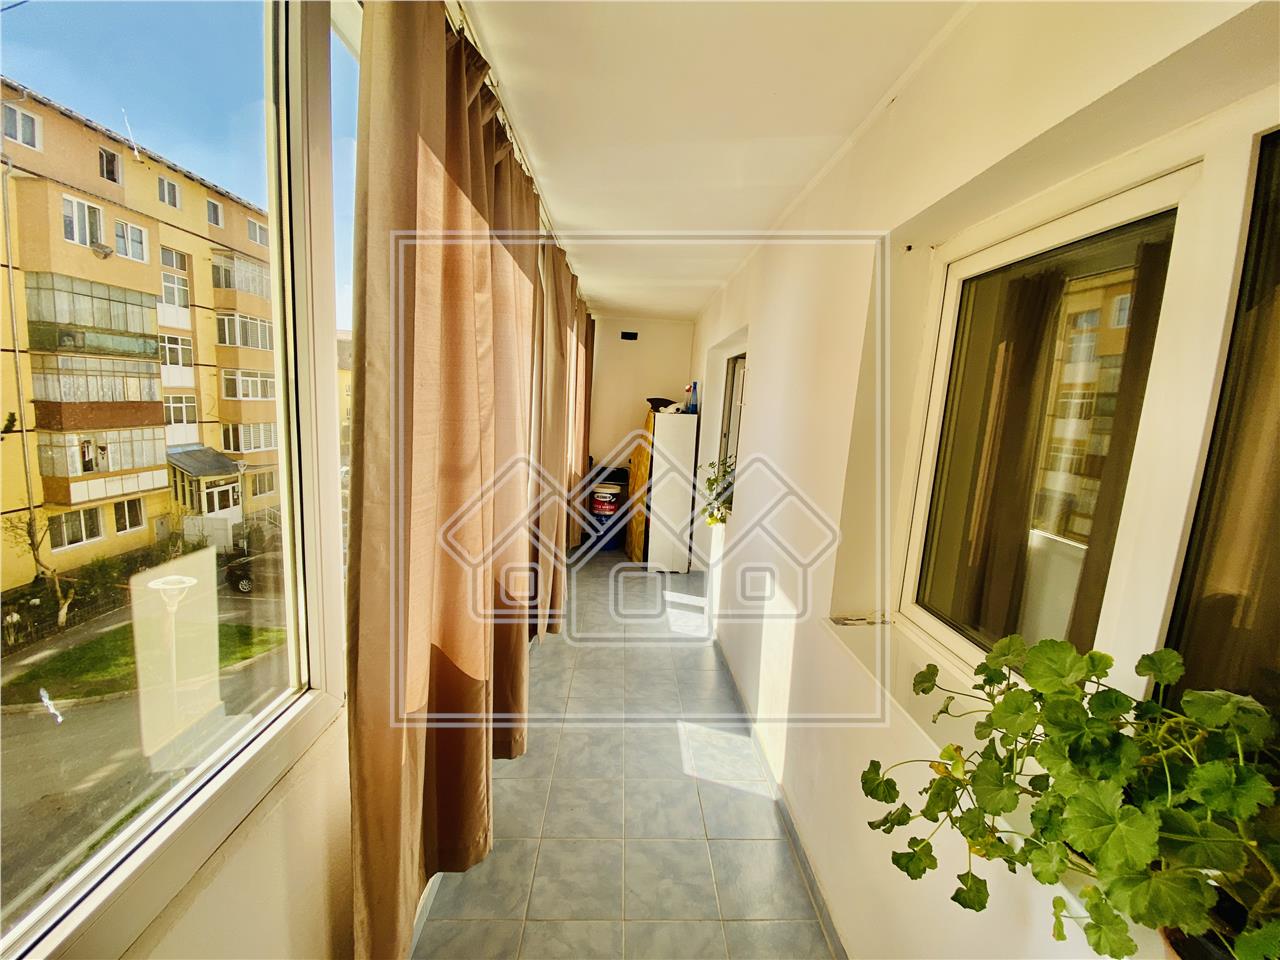 Apartment for sale in Sibiu - 3 rooms, balcony and cellar - Terezian